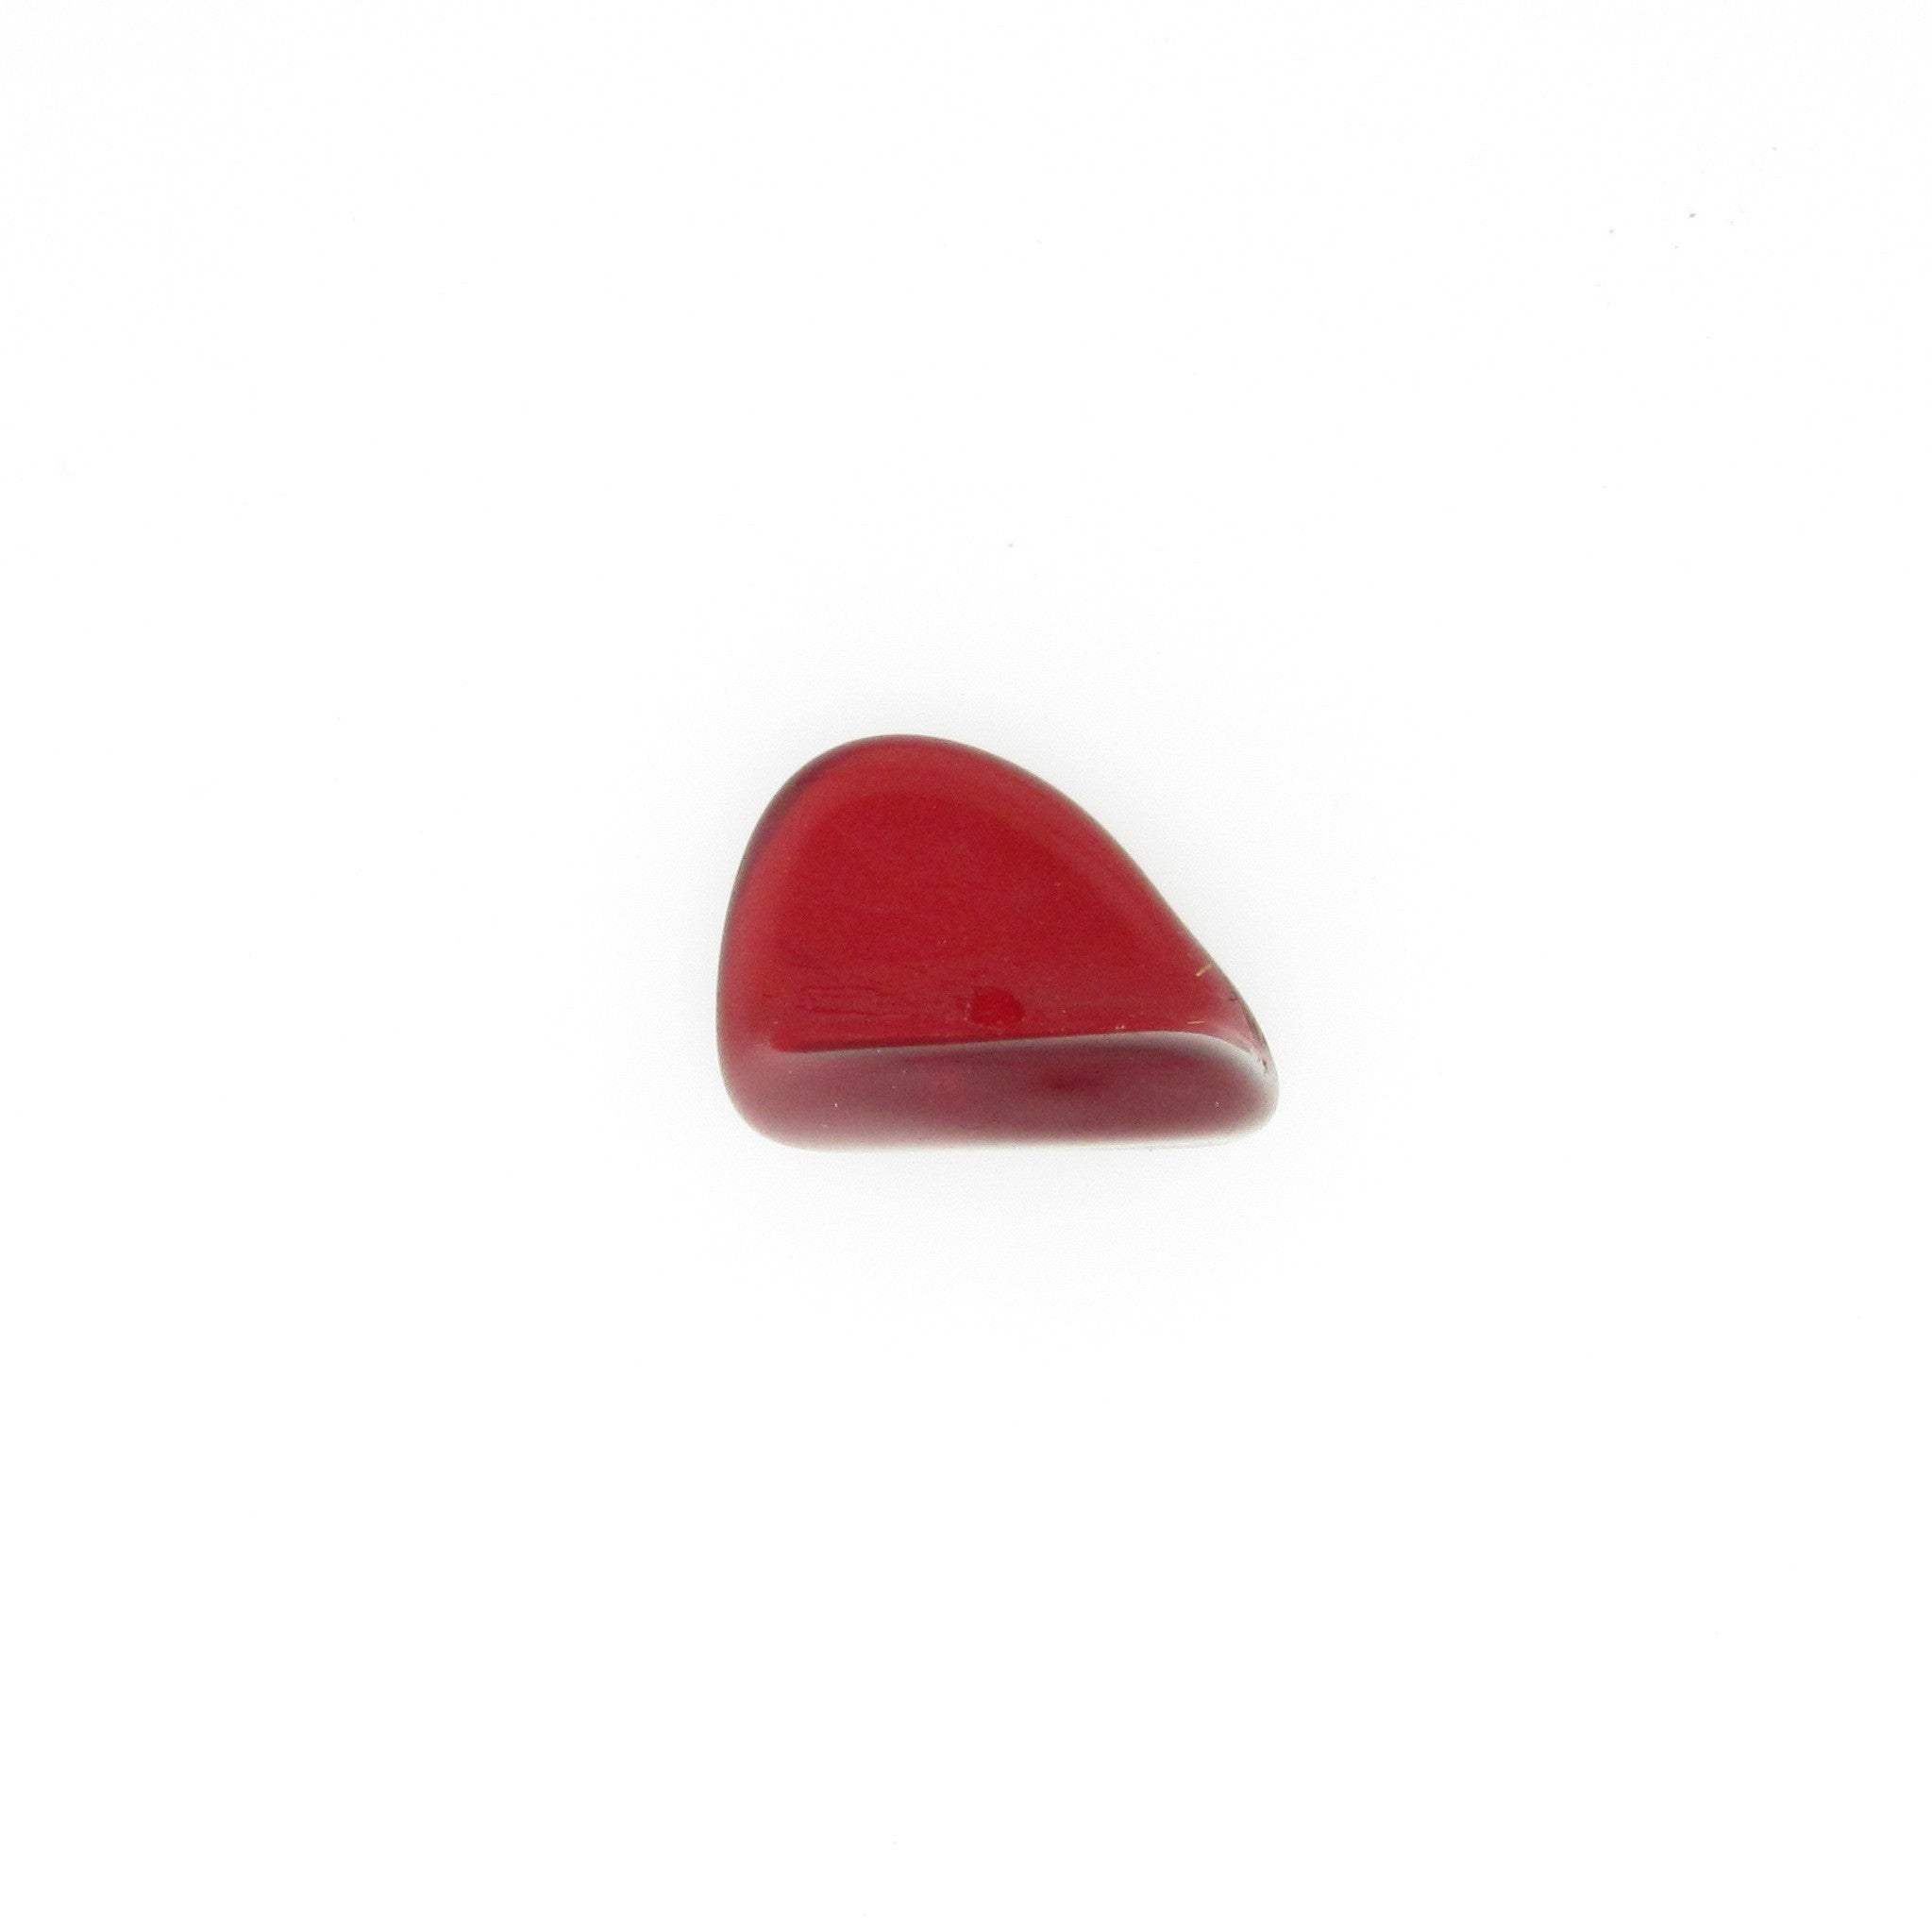 Ruby Glass Bead (36 pieces)